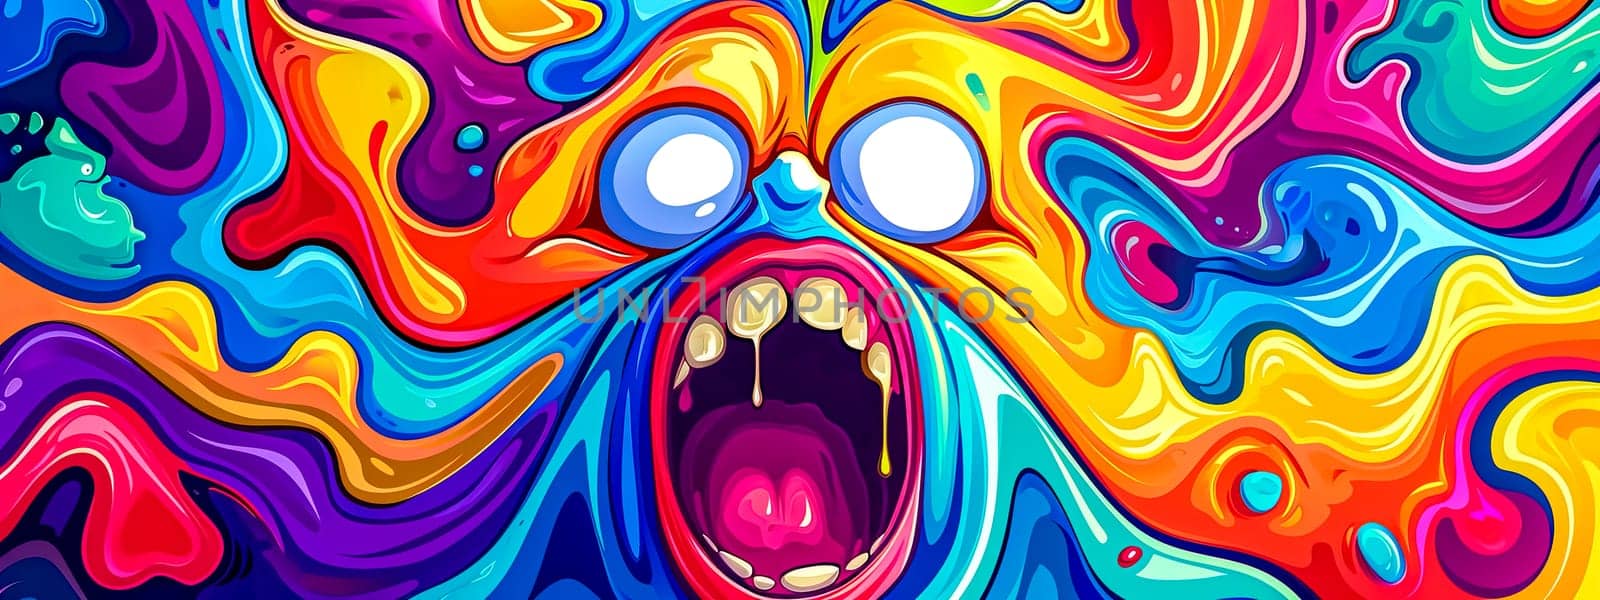 Abstract swirls of vivid colors with a cartoonish face in a state of shock or surprise. by Edophoto